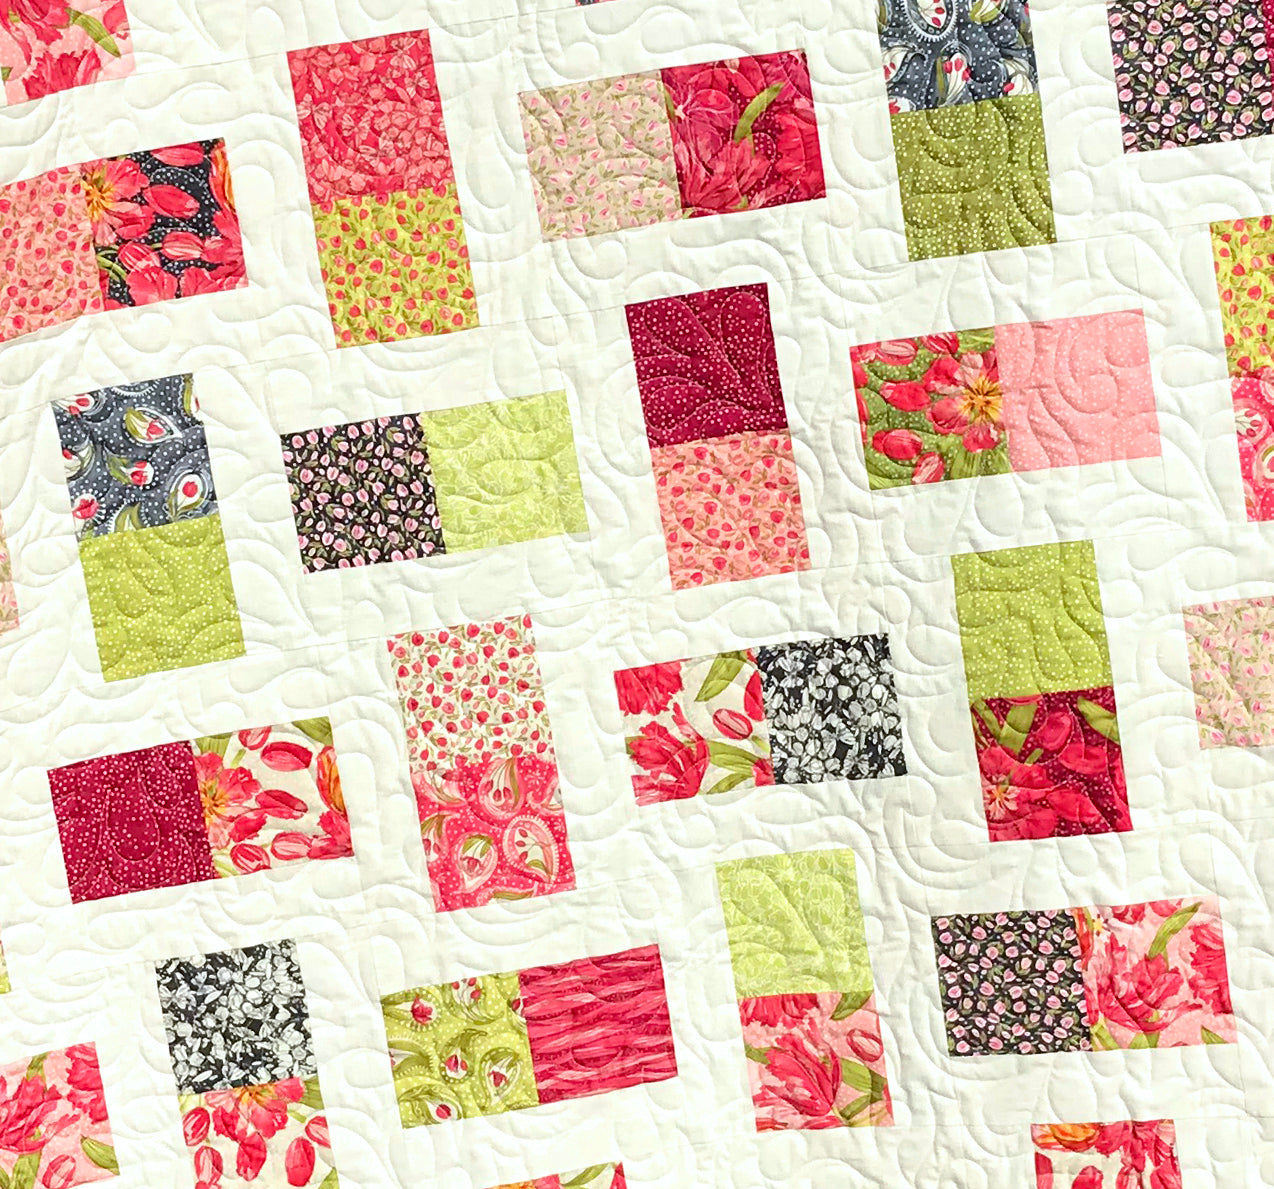 Pink Green and White Floral Patchwork Quilt - Handmade Quilts, Digital Patterns, and Home Décor items online - Cuddle Cat Quiltworks